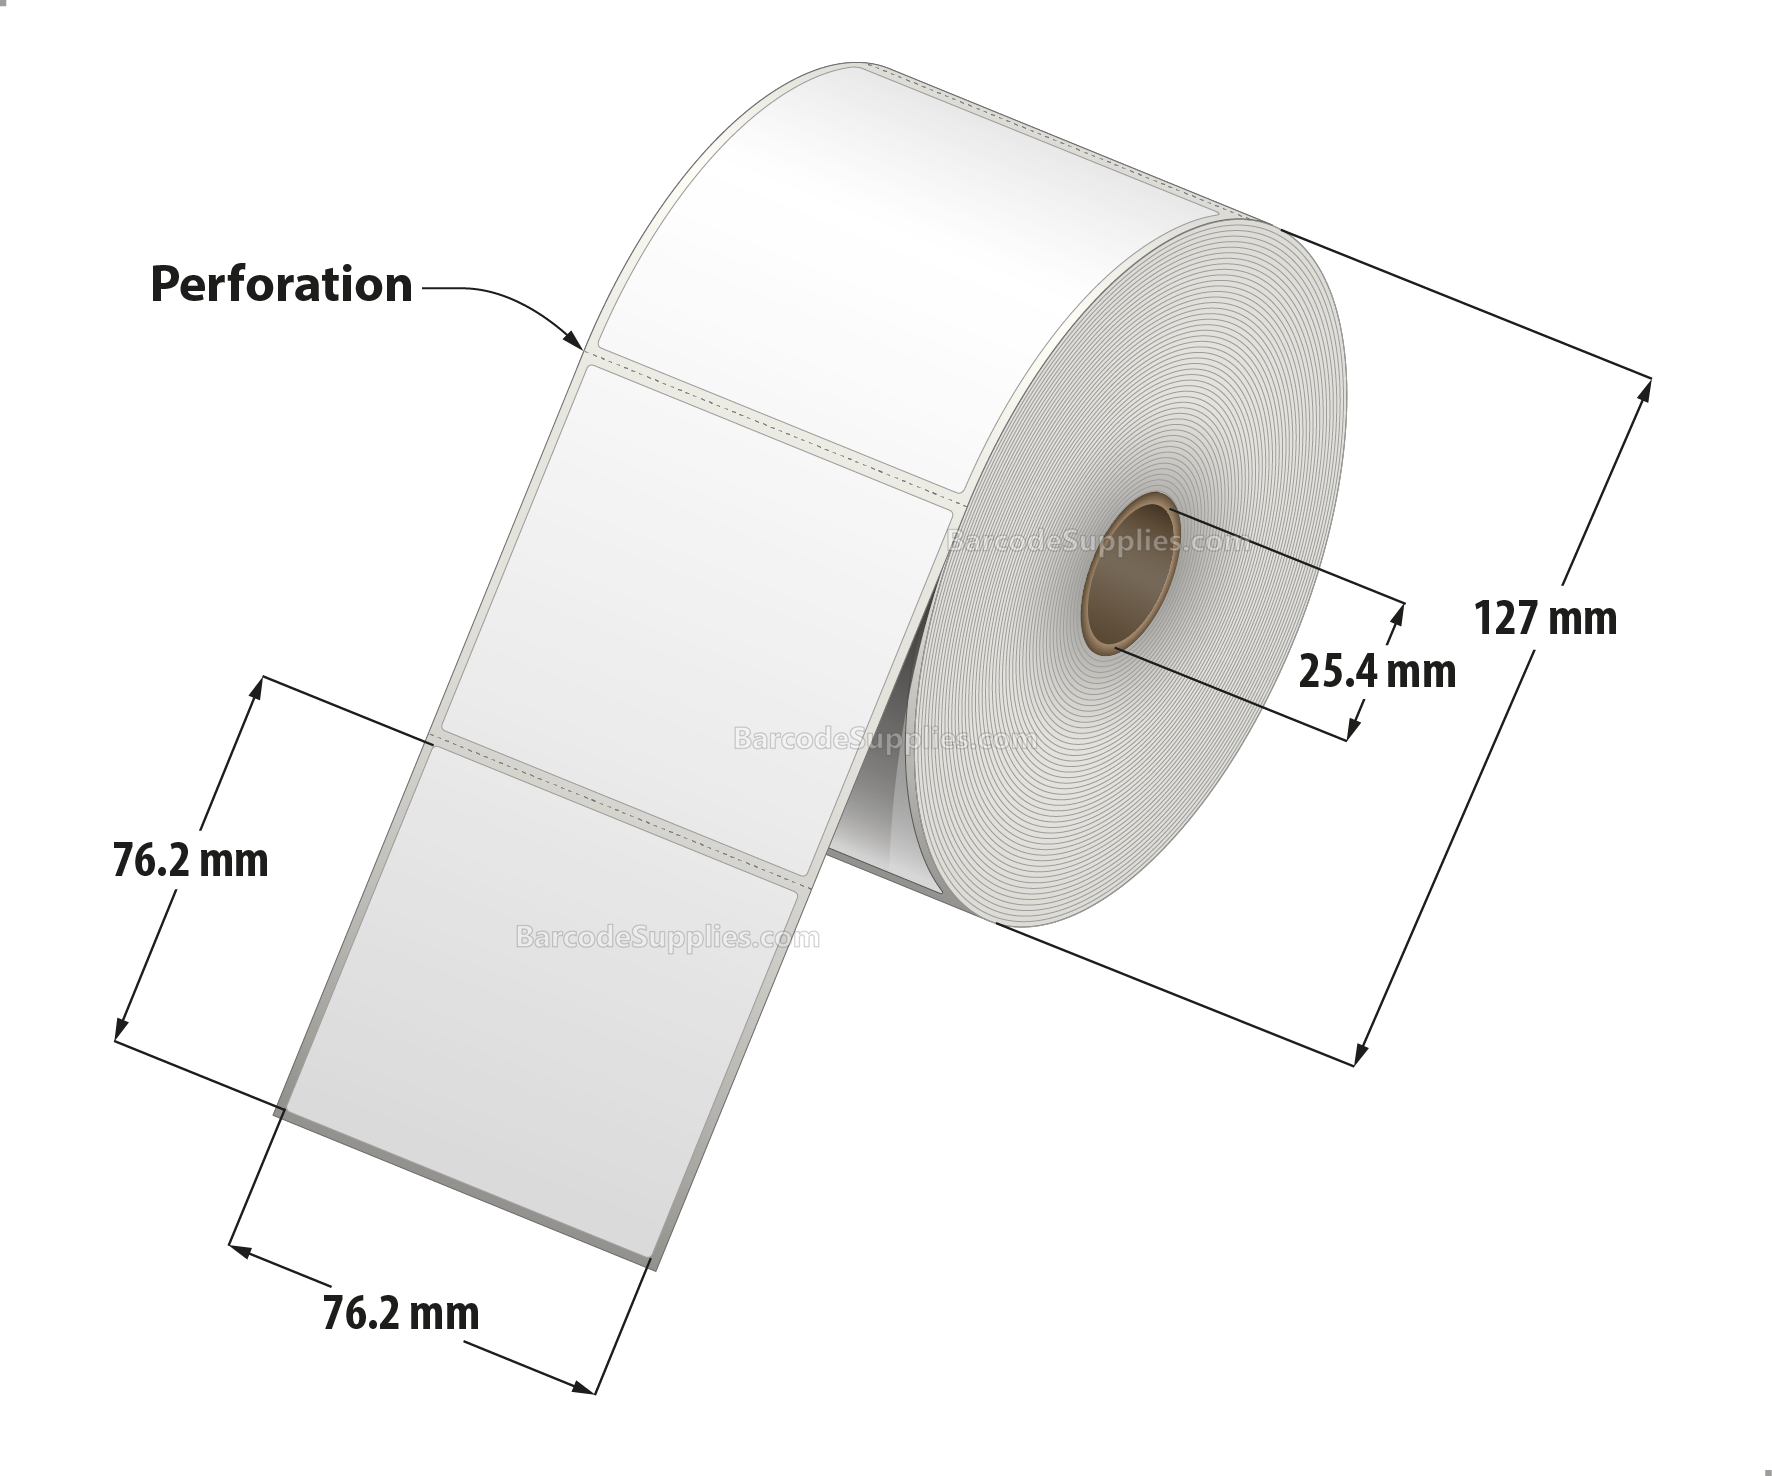 3 x 3 Direct Thermal White Labels With Permanent Acrylic Adhesive - Perforated - 850 Labels Per Roll - Carton Of 4 Rolls - 3400 Labels Total - MPN: DT33-15PDT